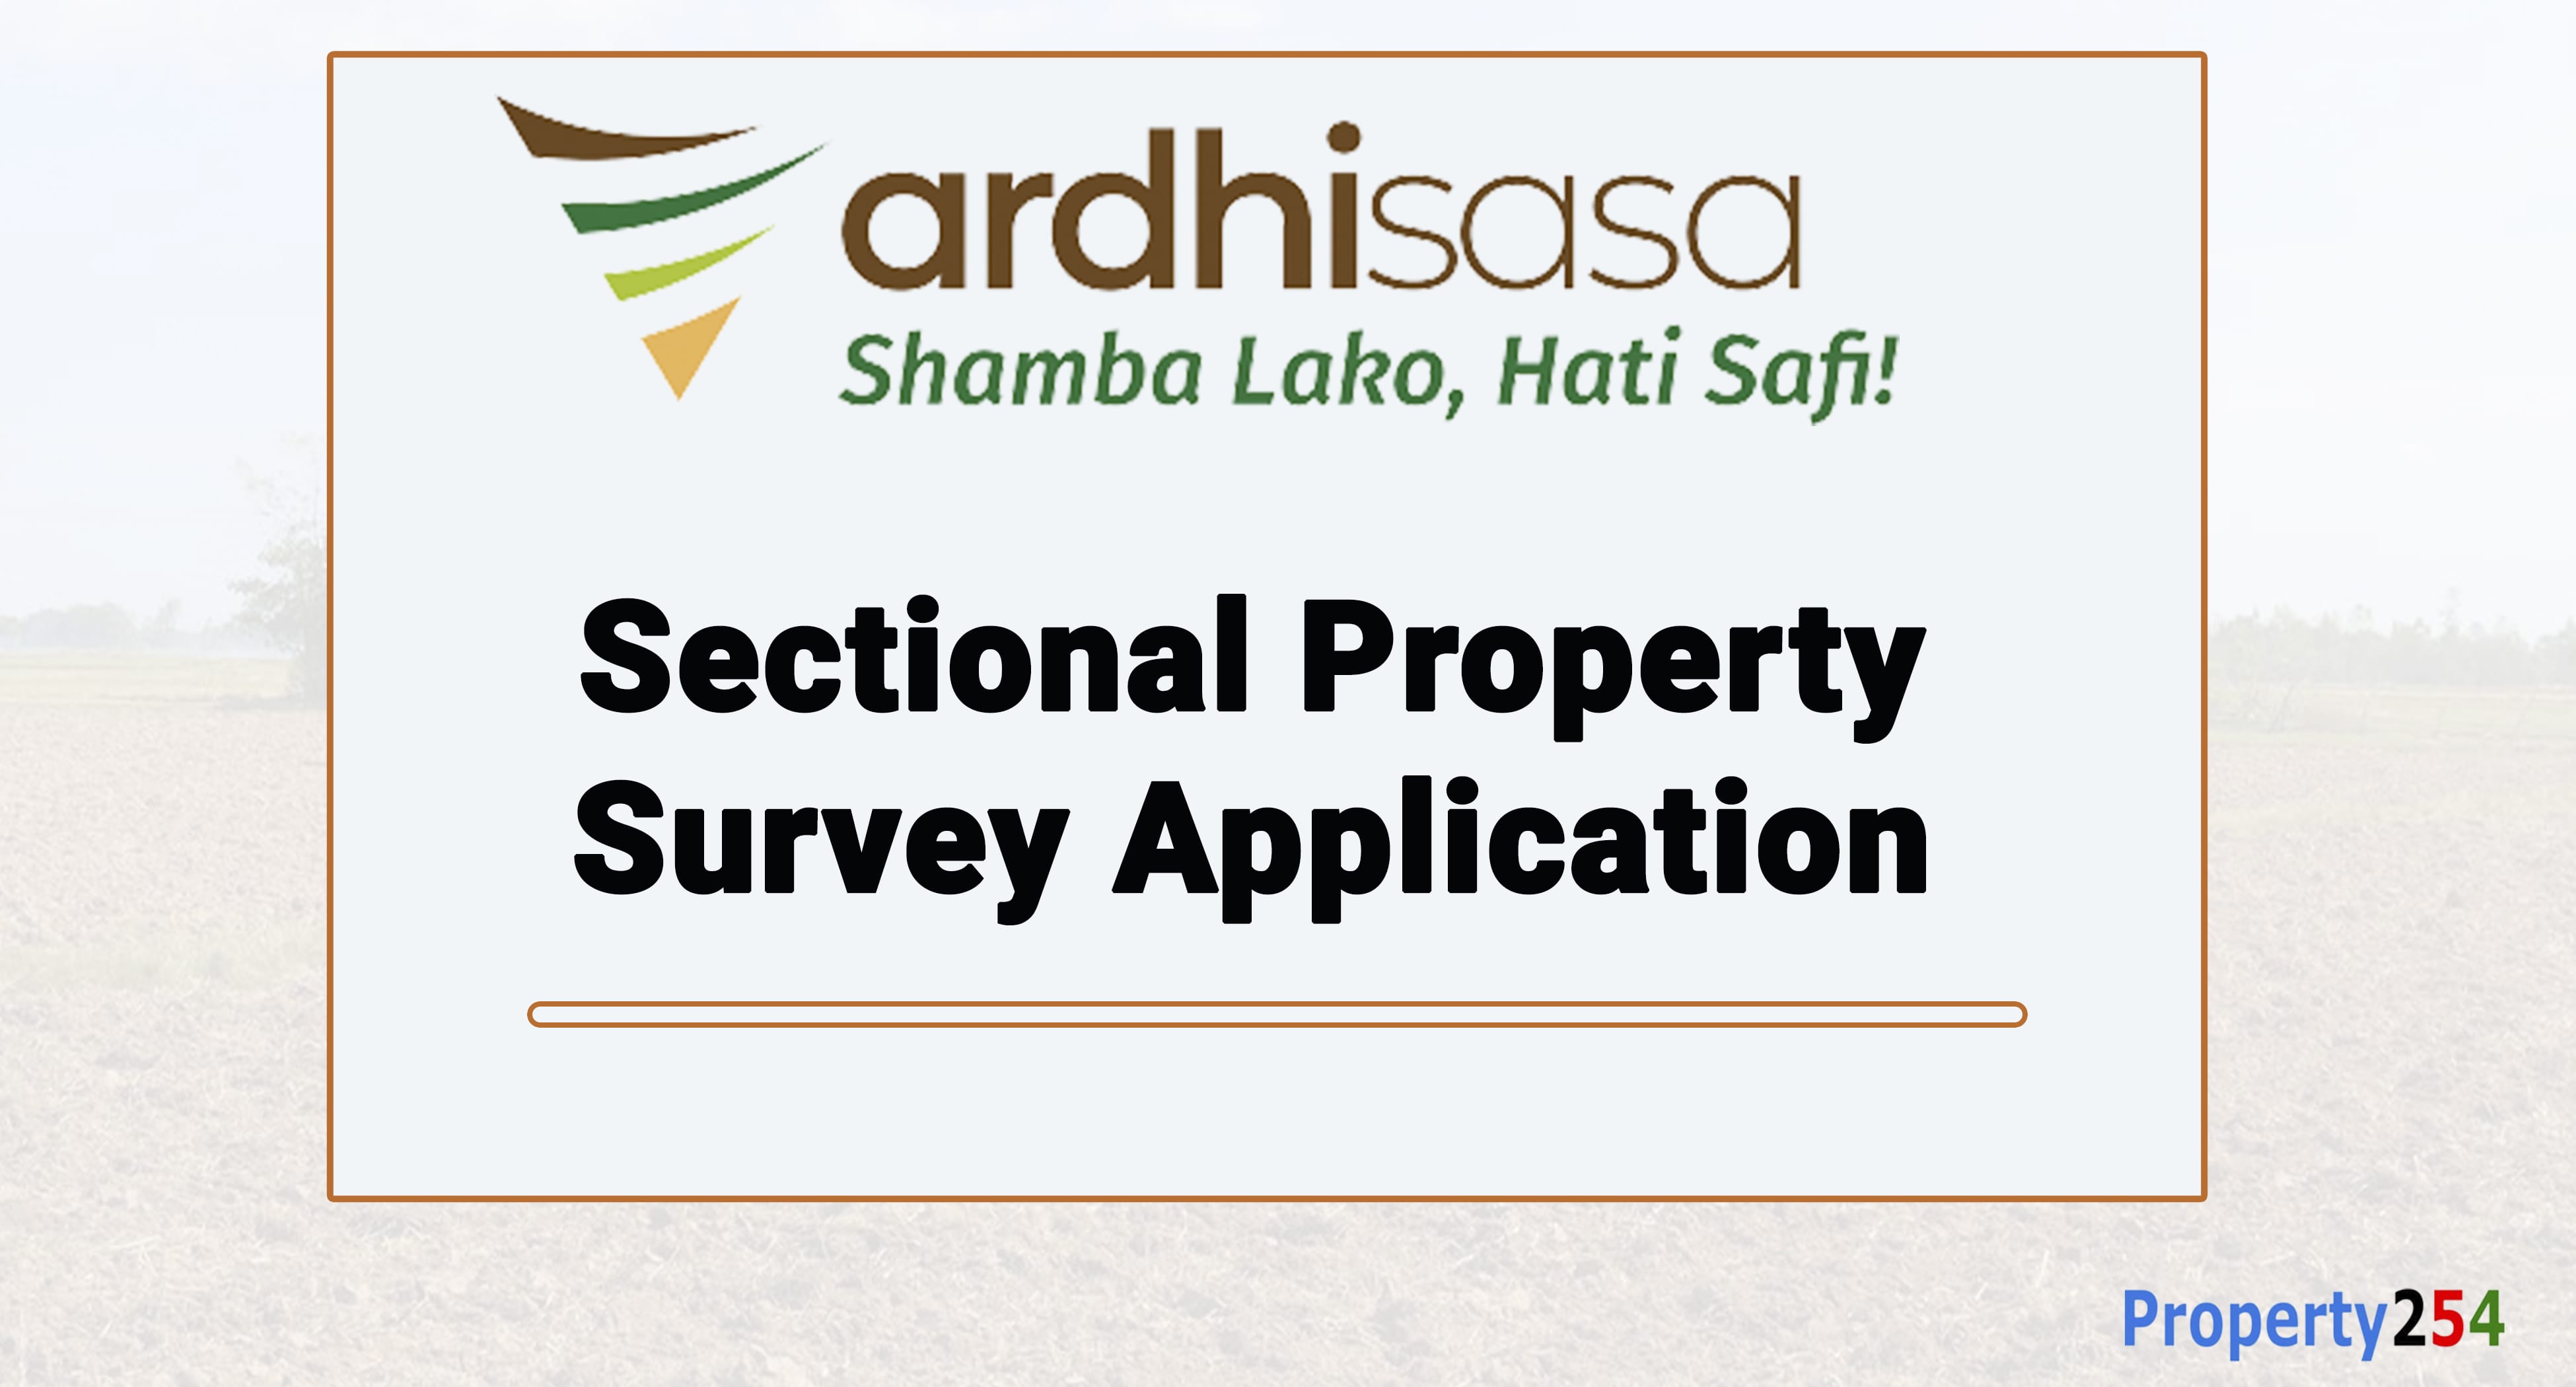 How to Make a Sectional Property Survey on Ardhisasa thumbnail